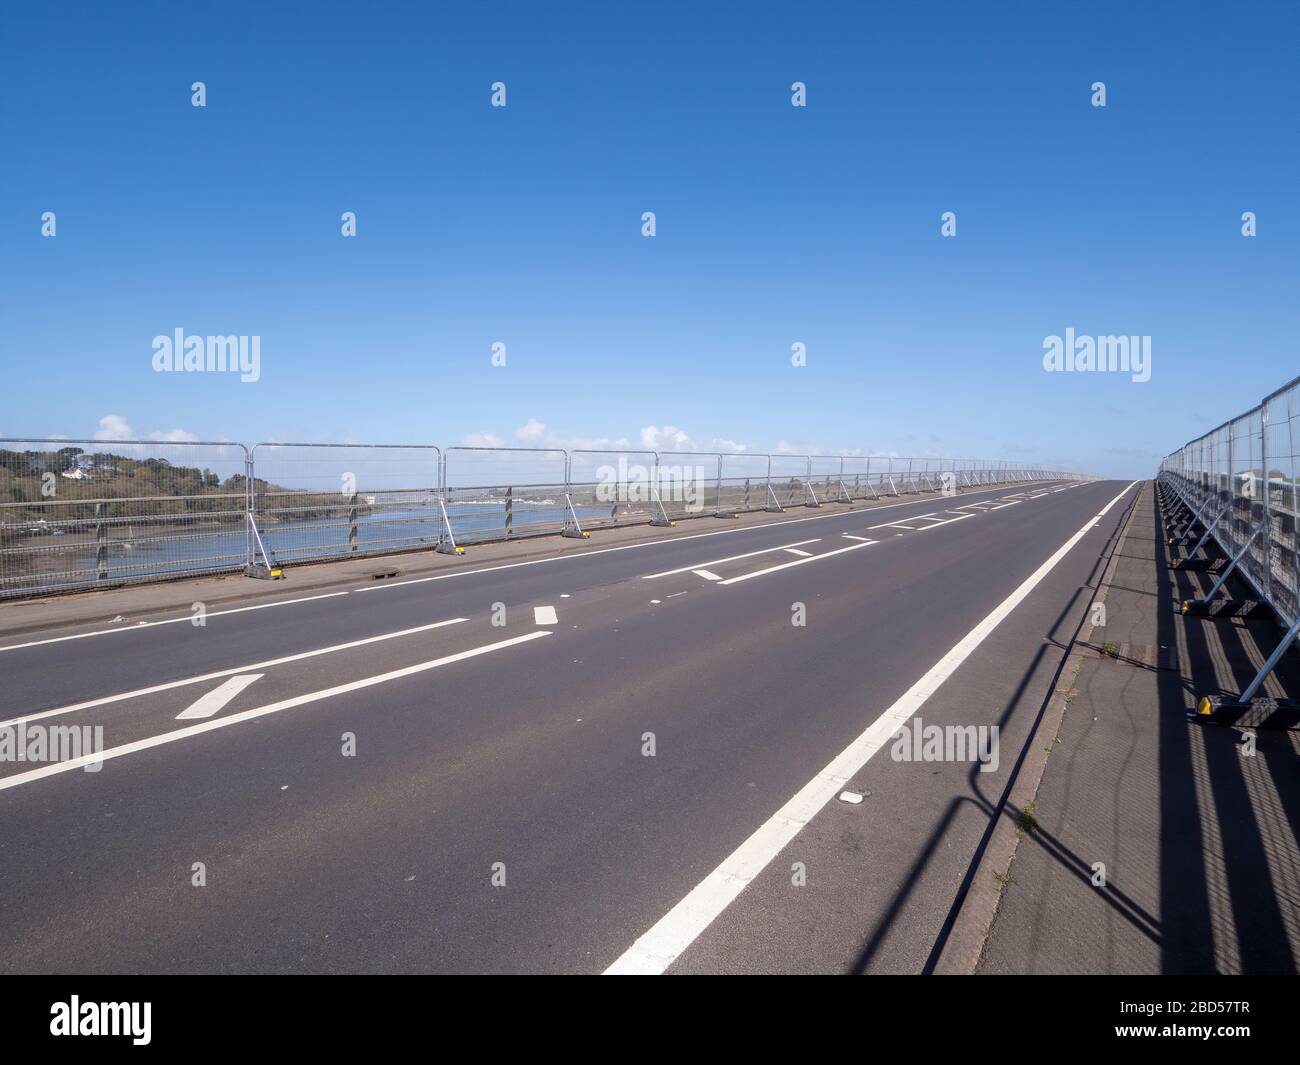 Anti suicide barriers attached to the bridge over the River Torridge at Bideford, Devon, Fixed April 2020. No traffic. Stock Photo